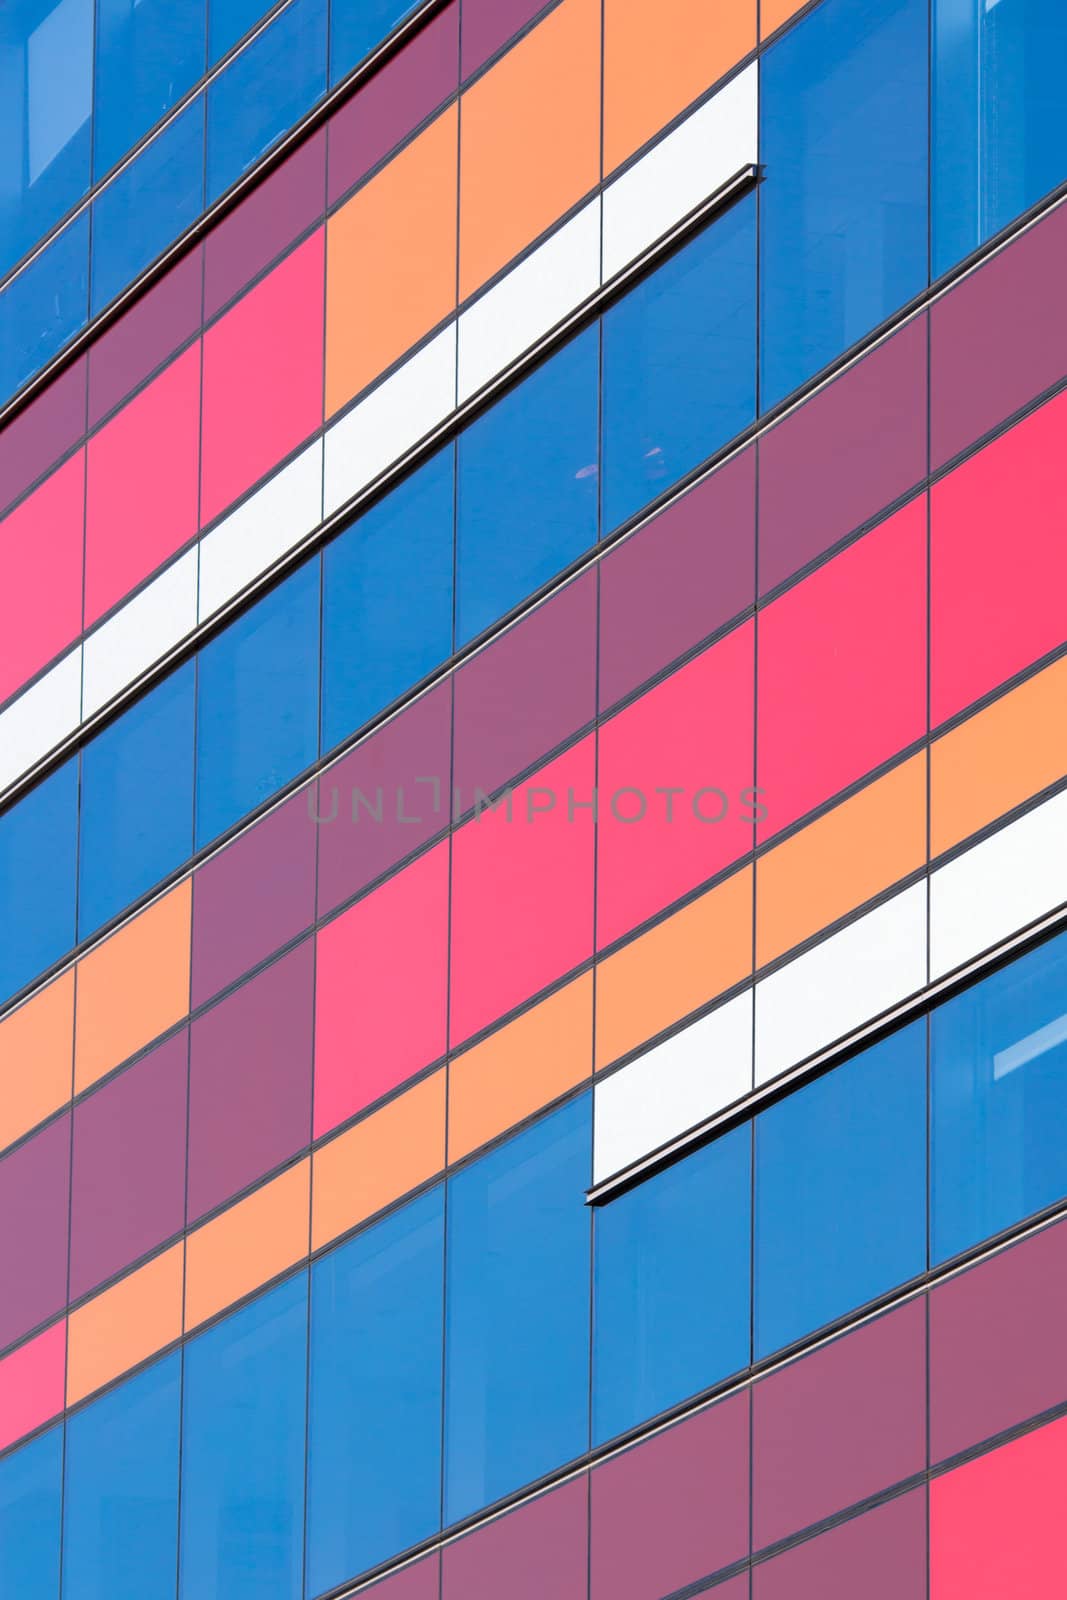 Decoration of a wall building, architecture colors